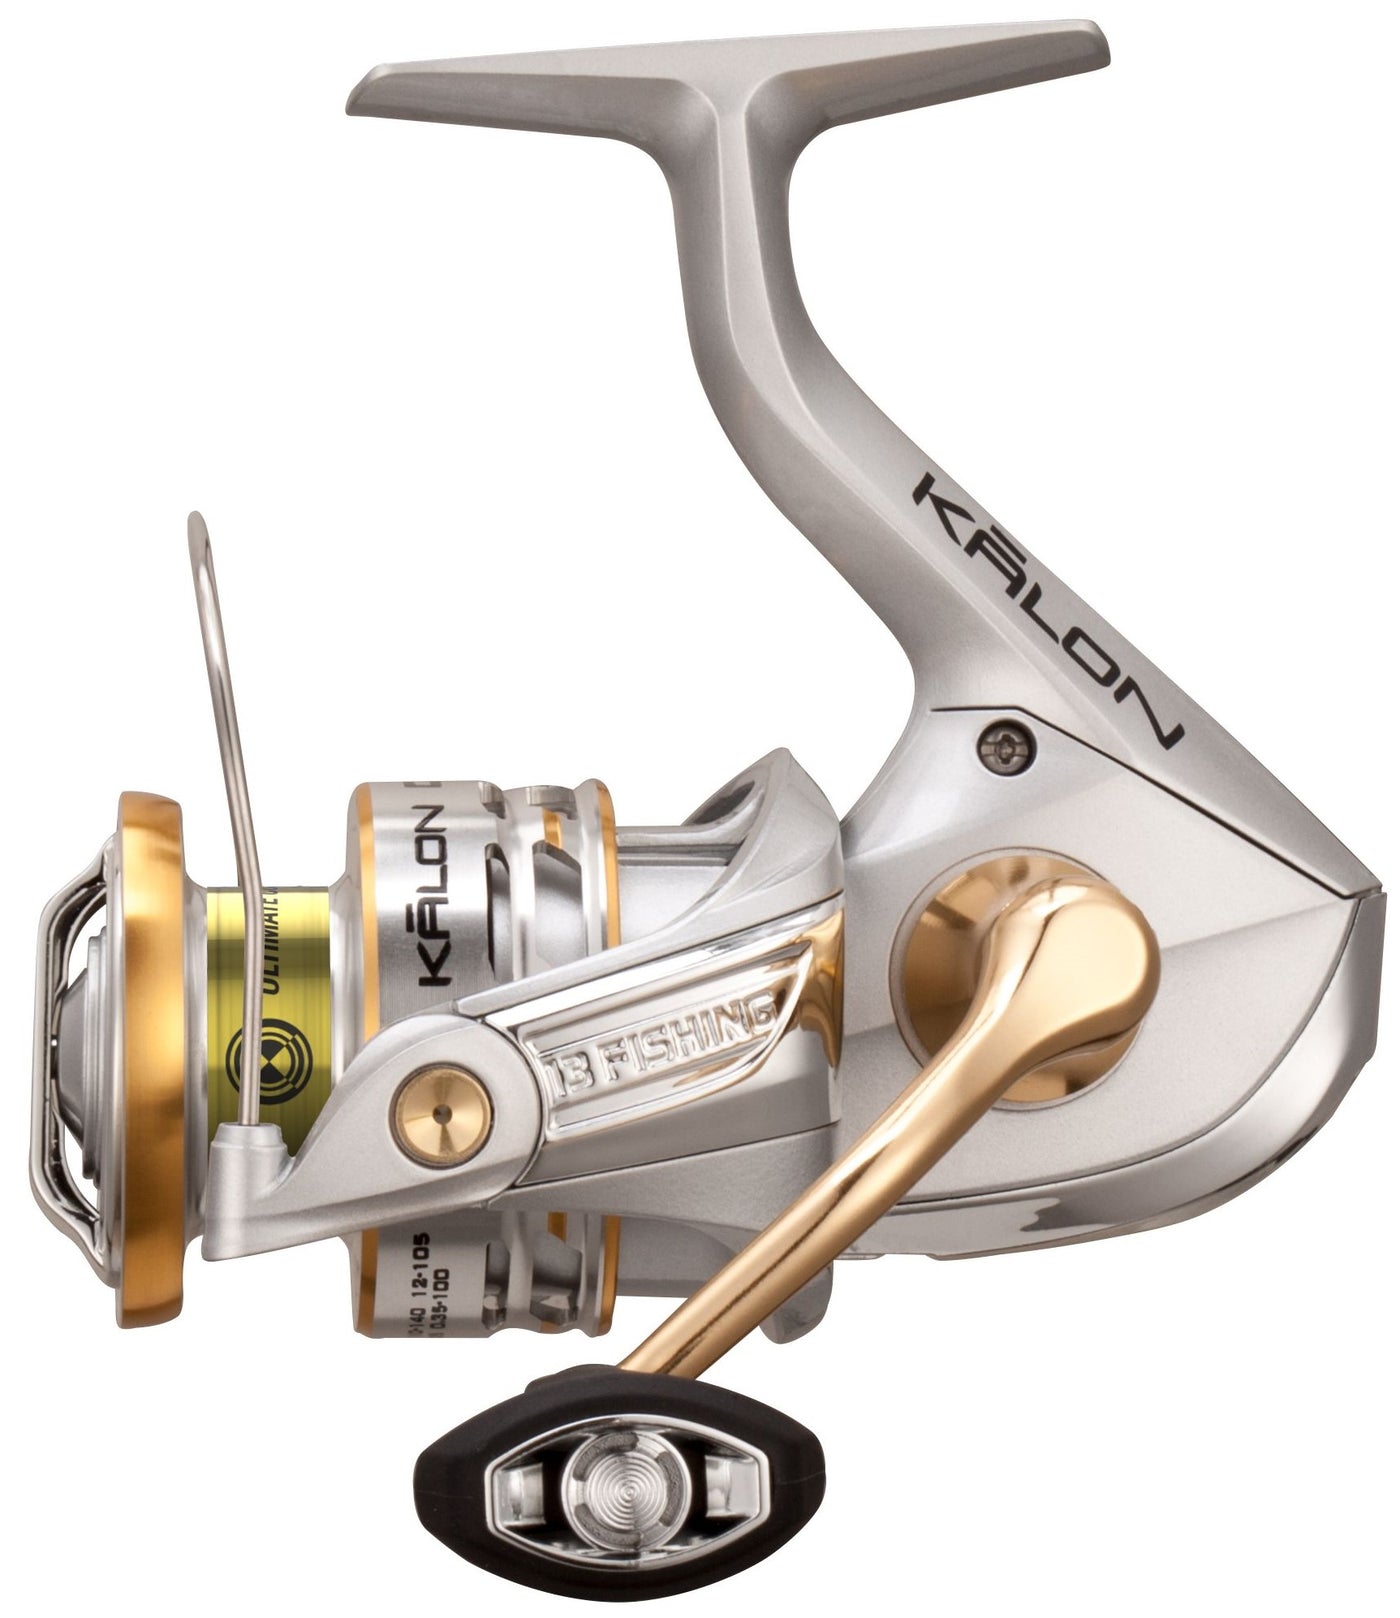 13 Fishing All Freshwater Left Fishing Reels for sale